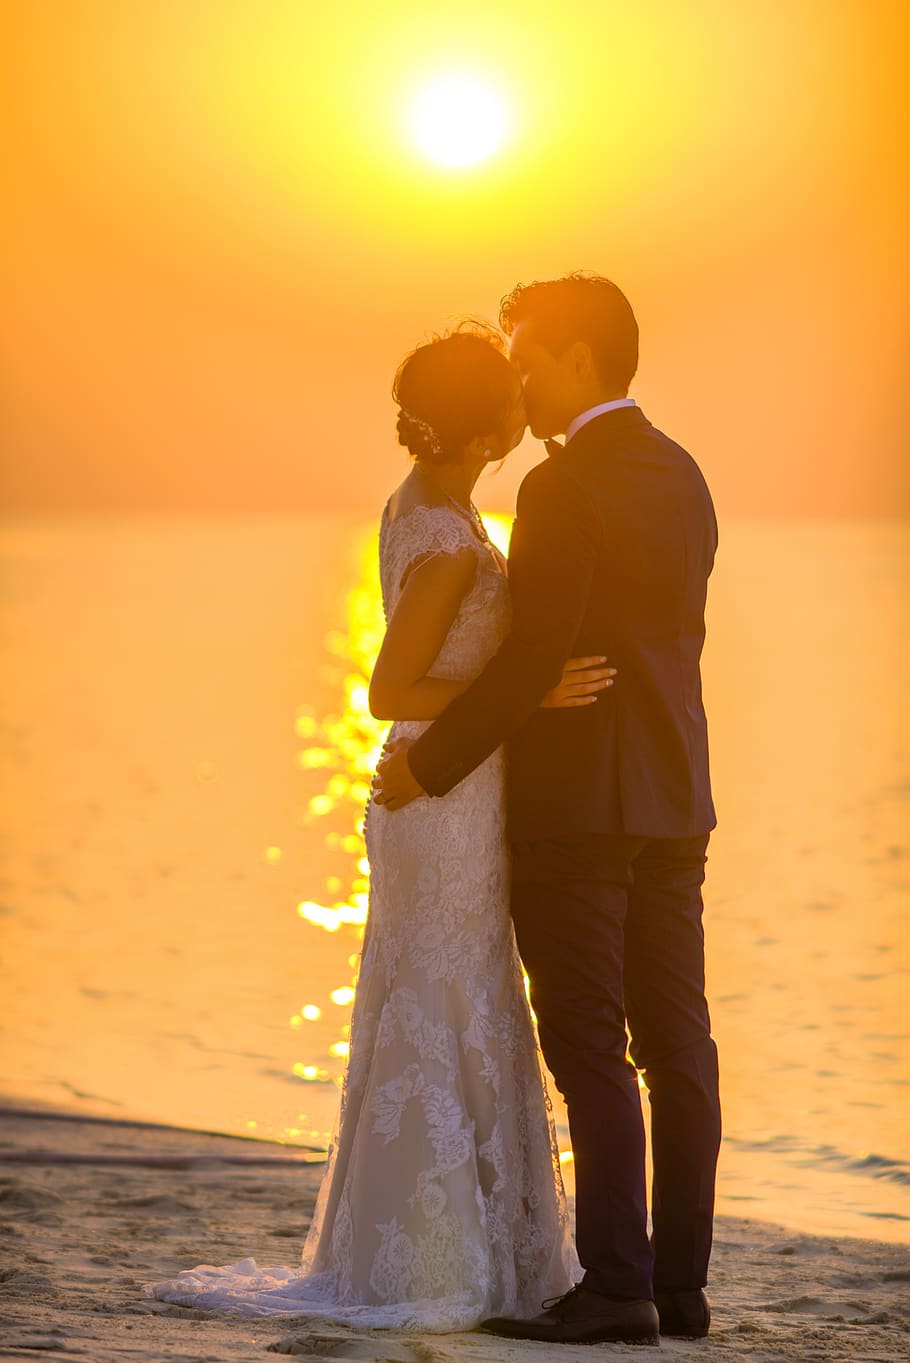 Man and Woman Kissing Under Sunset, adult, affair, anniversary